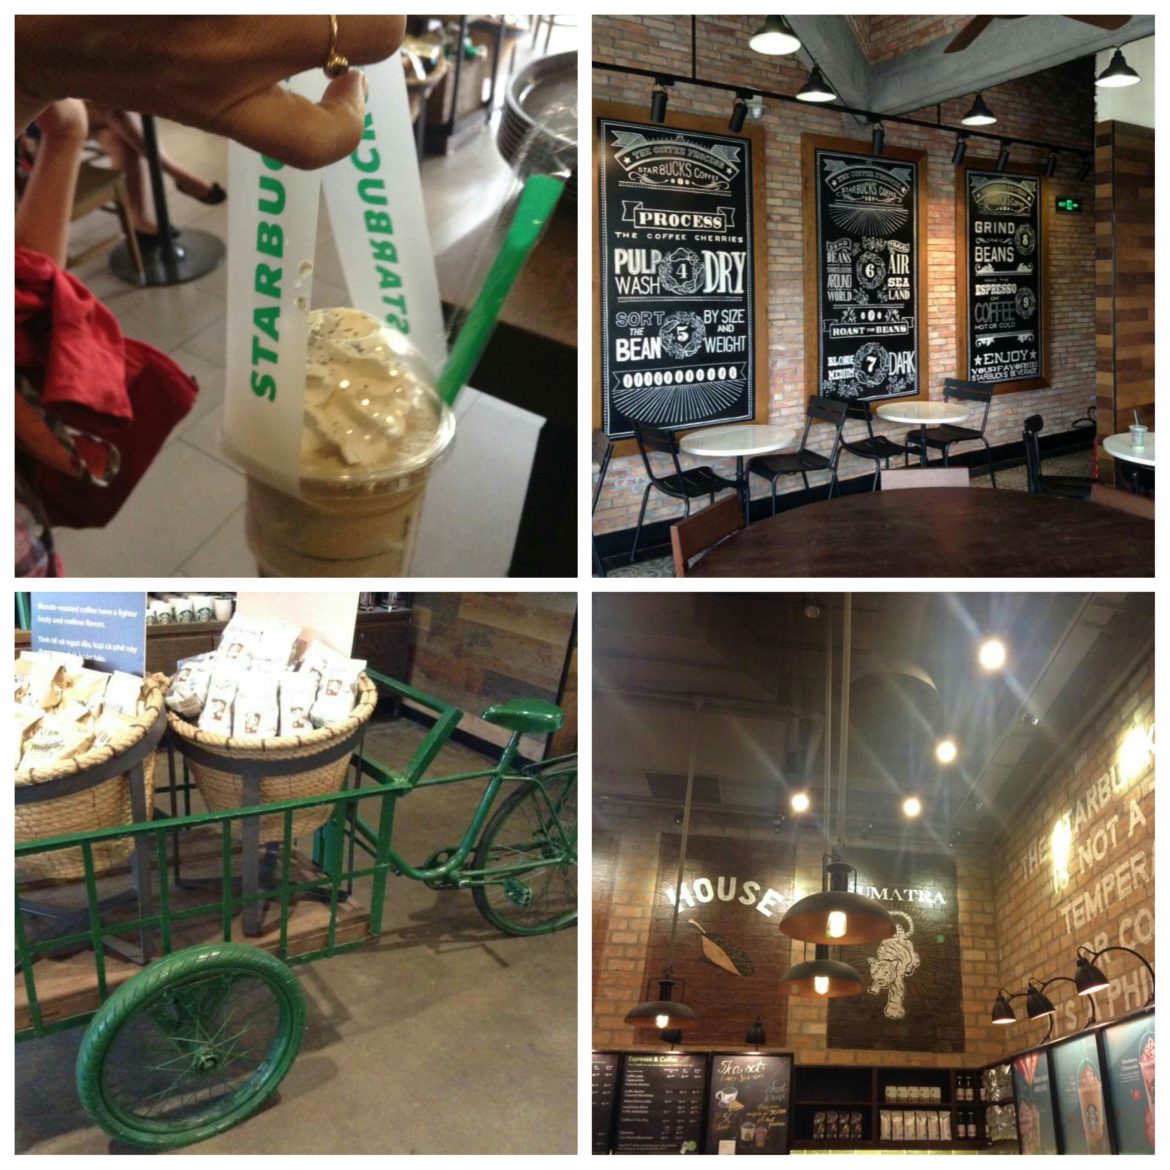 Starbucks in Vietnam. (They have Frappuccino carrier handles!)